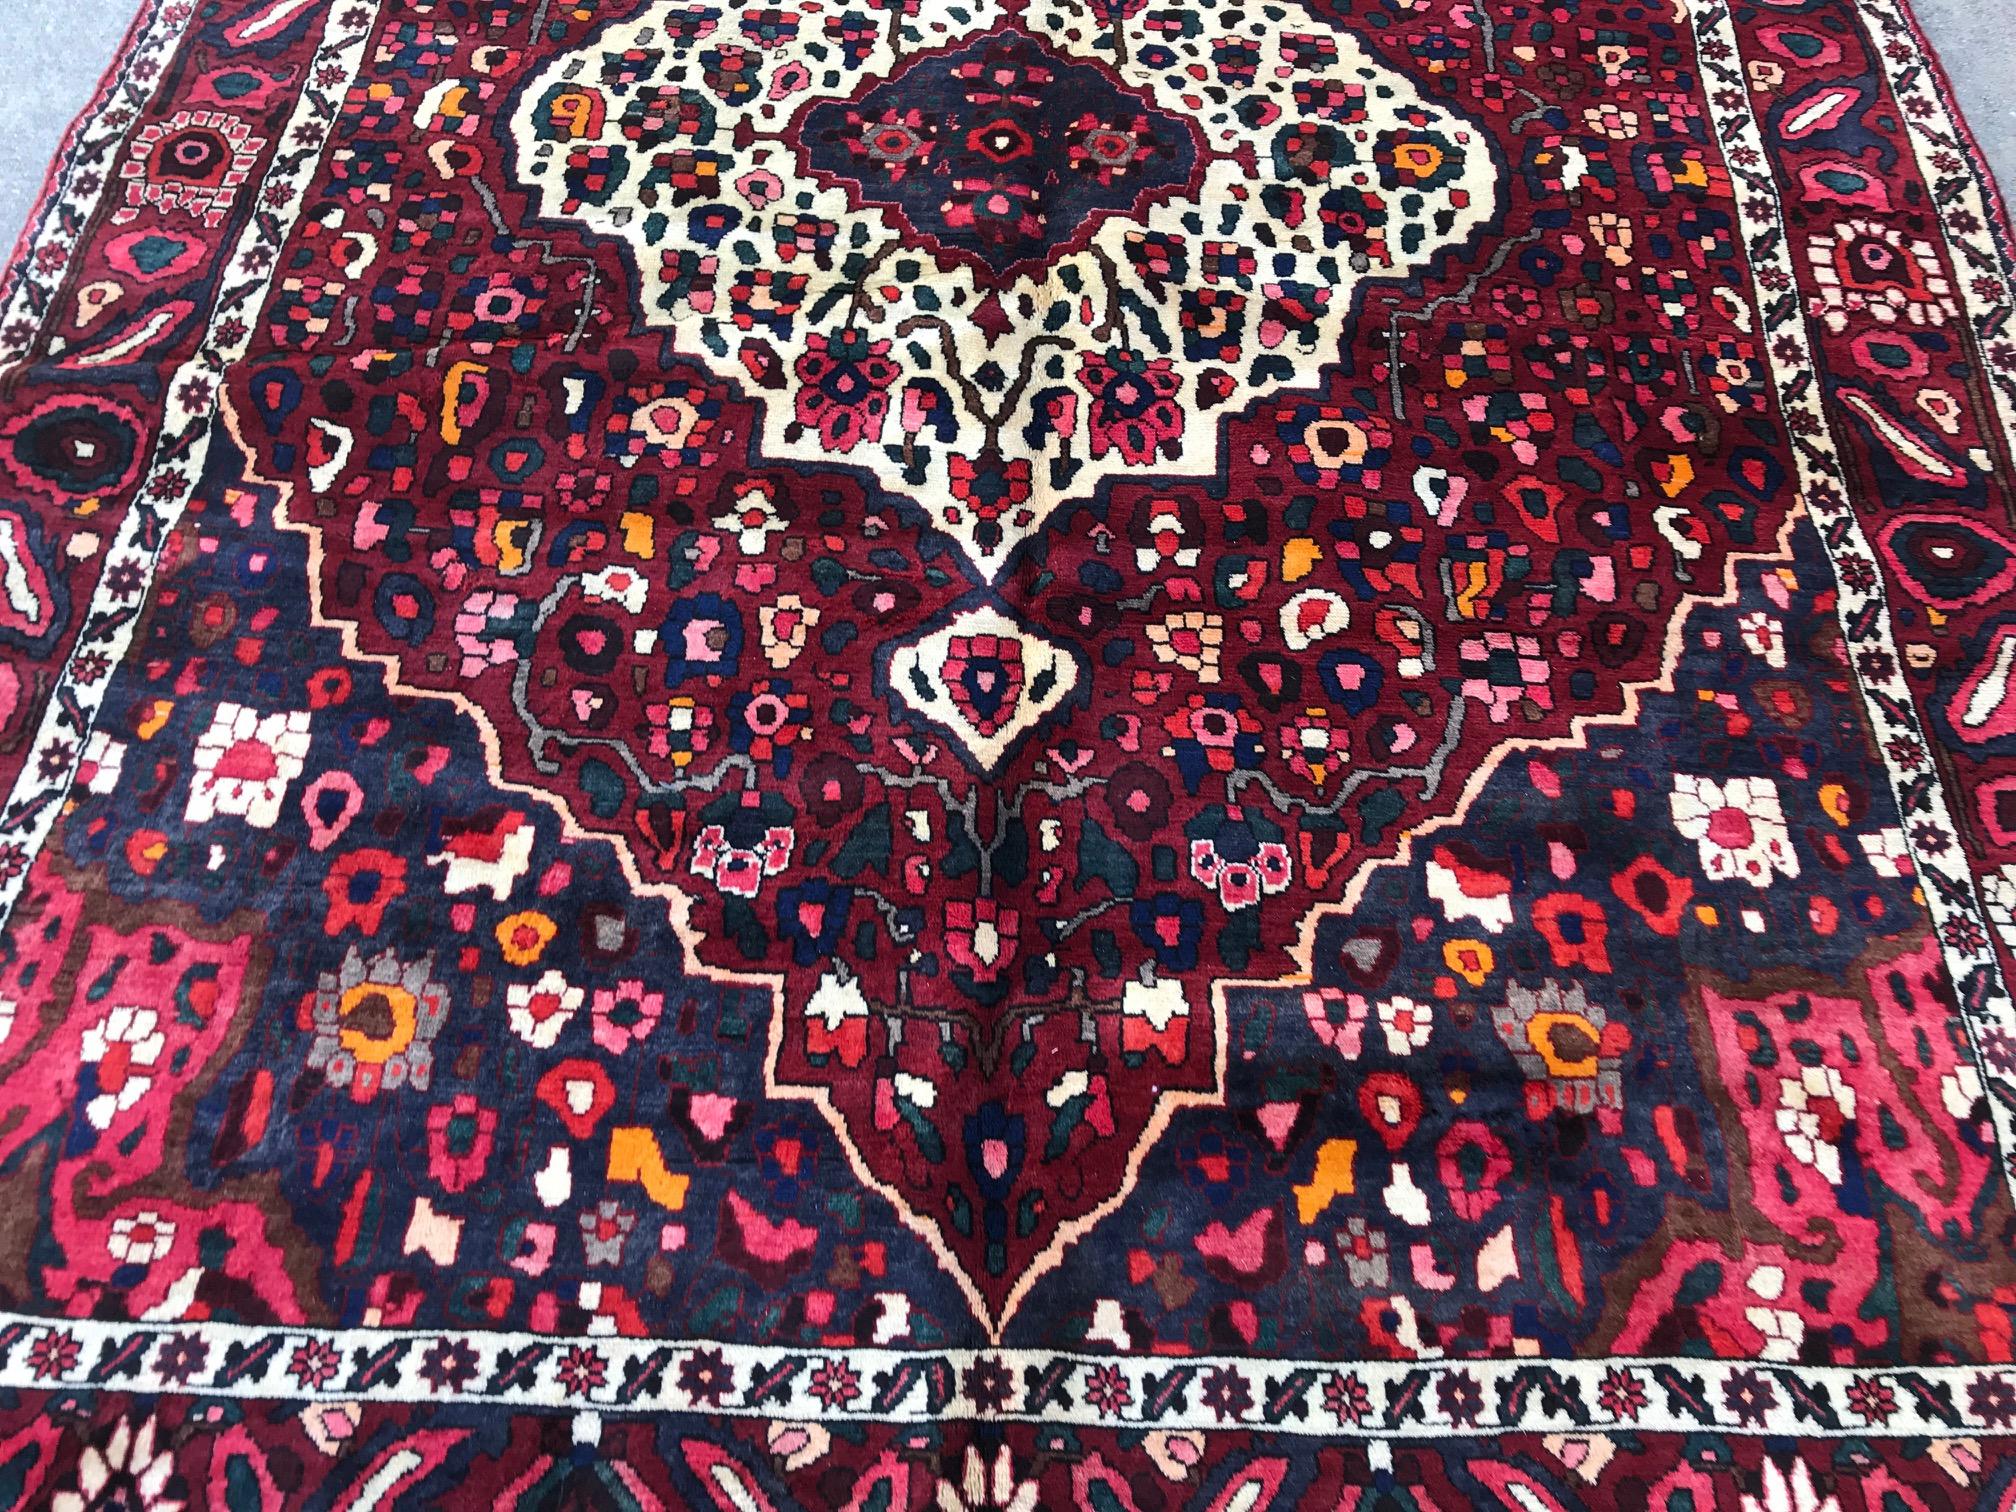 7'x10' Hand Knotted Persian TRIBAL BAKHTIARI Rug, Hand Tied Carpet, Retail $5400, Shipping $45